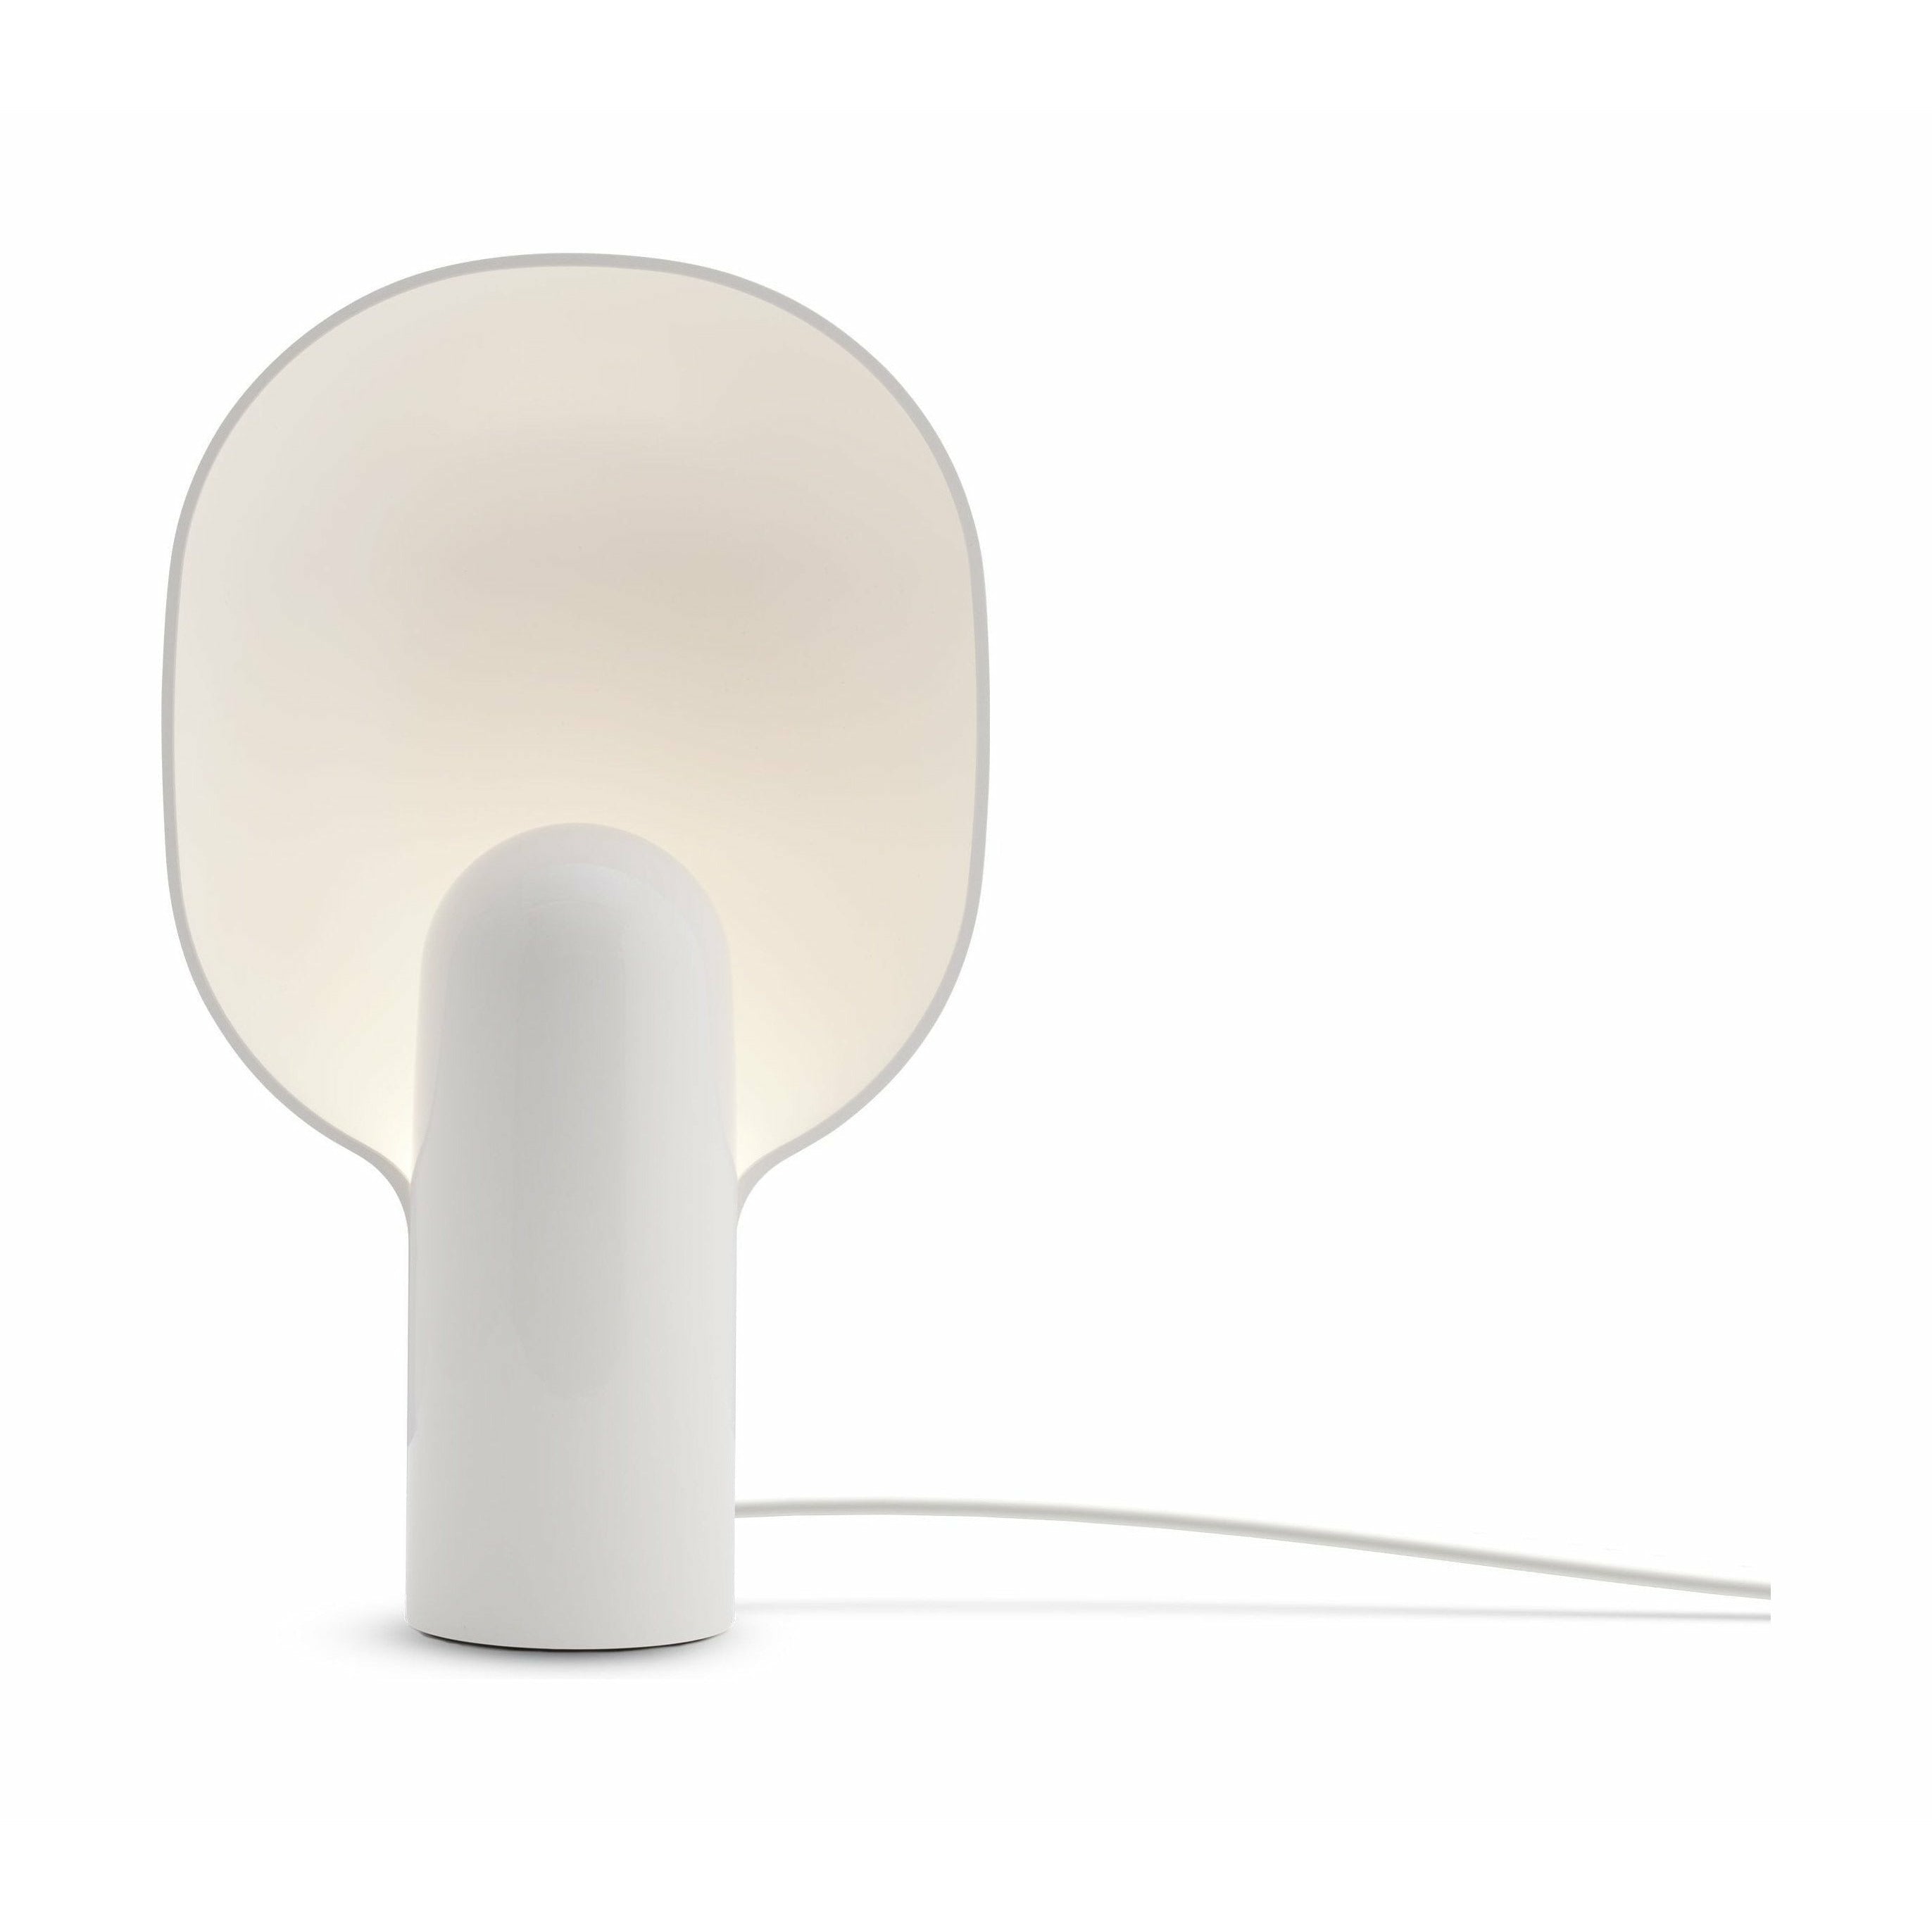 New Works Ware Table Lamp, White